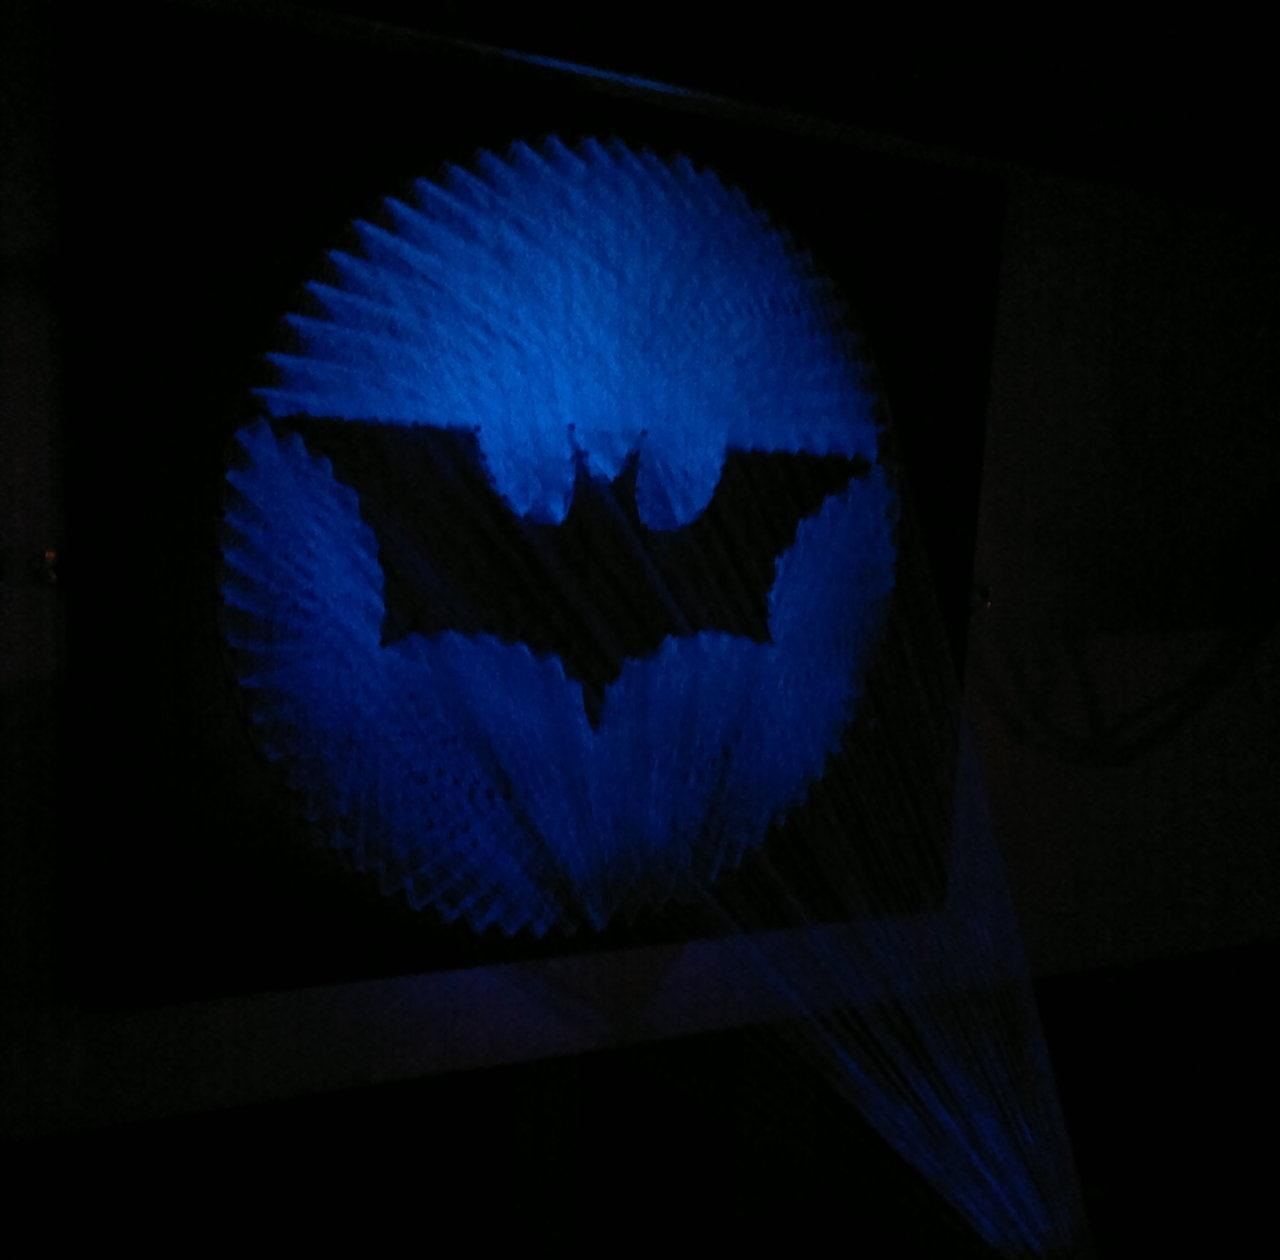 Holy String Art, Batman! 6 of the Coolest Thread Art Projects Ever